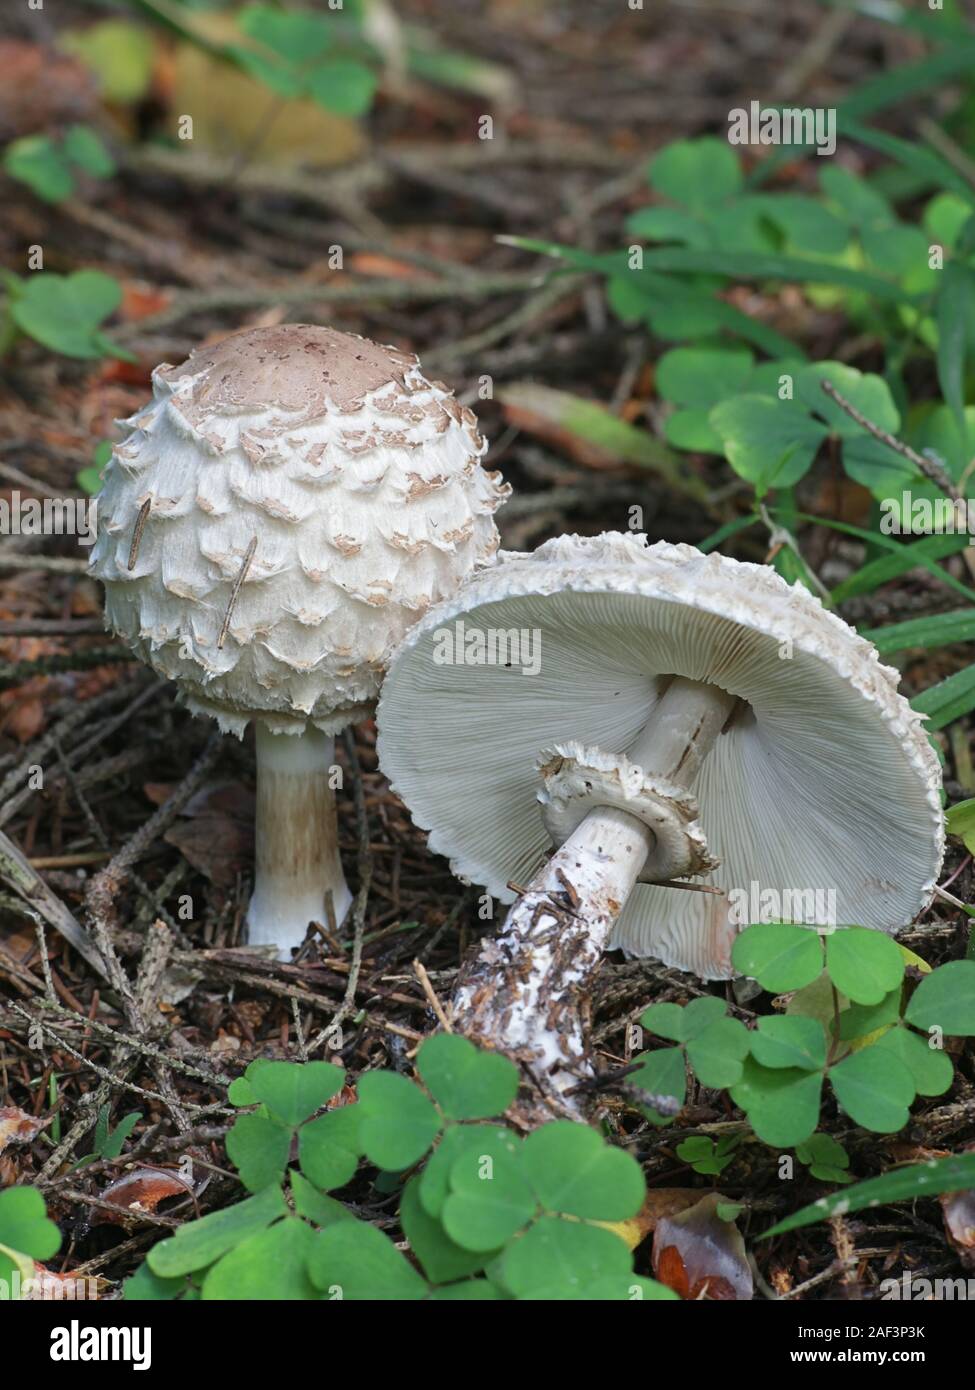 Chlorophyllum olivieri, known as Olive Shaggy Parasol, mushrooms from Finland Stock Photo